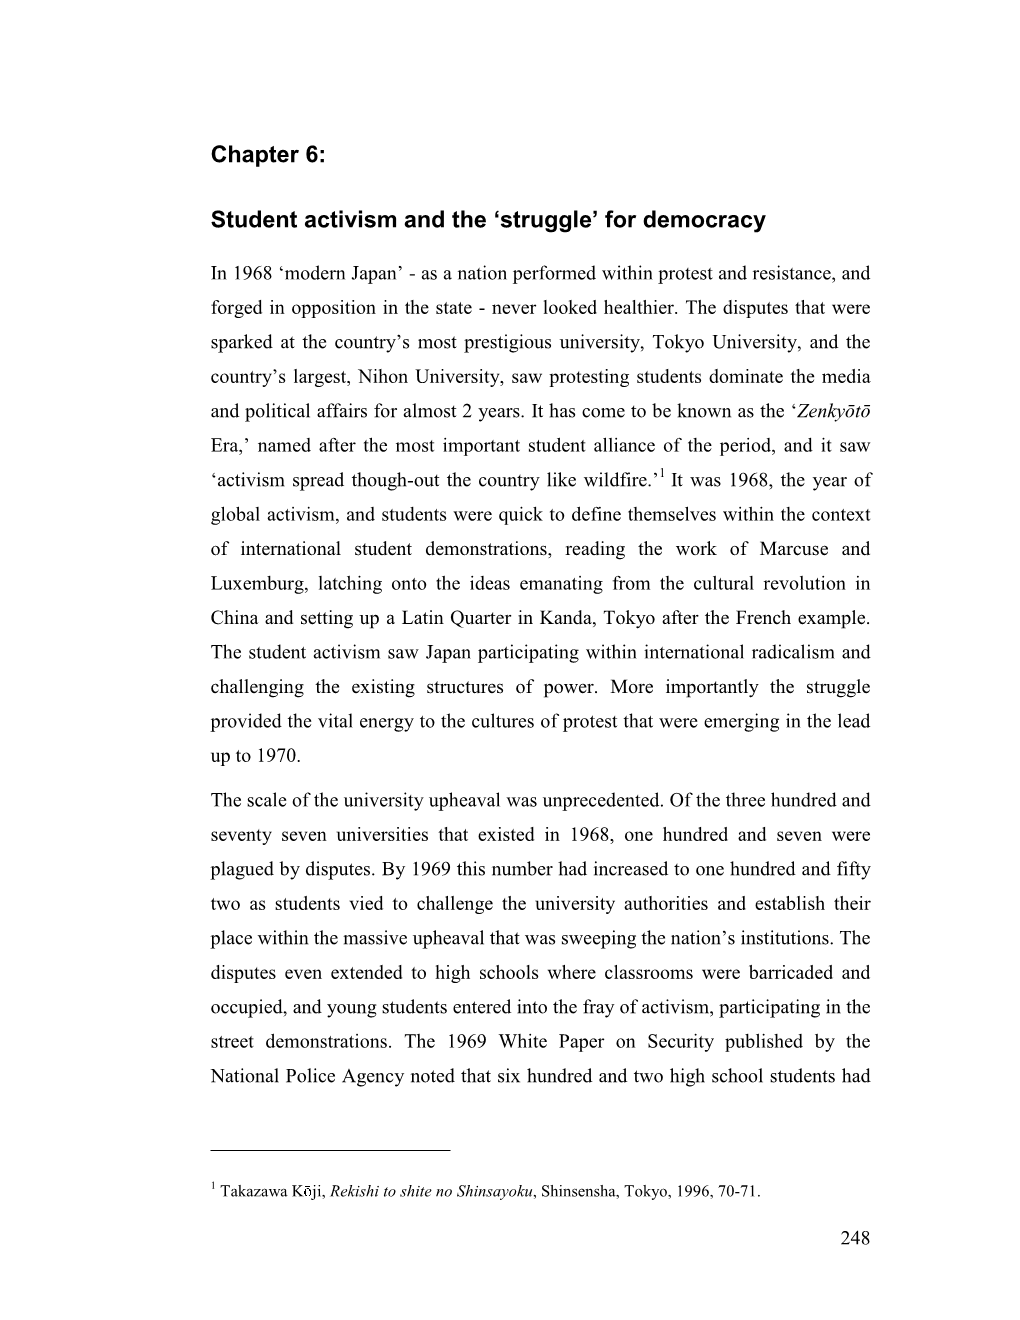 Chapter 6: Student Activism and the 'Struggle' for Democracy